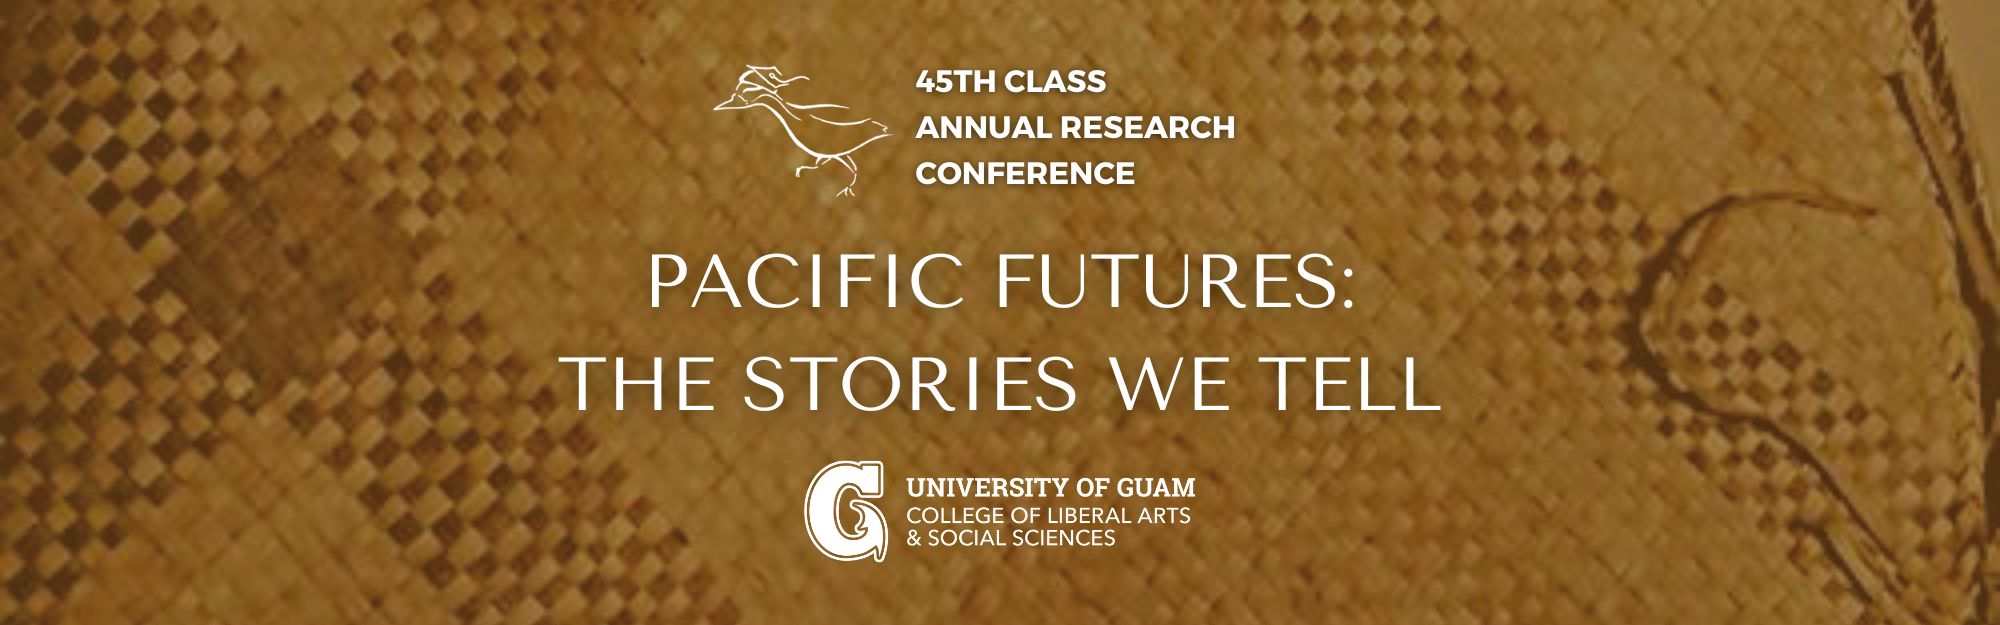 45th CLASS Annual Research Conference banner image